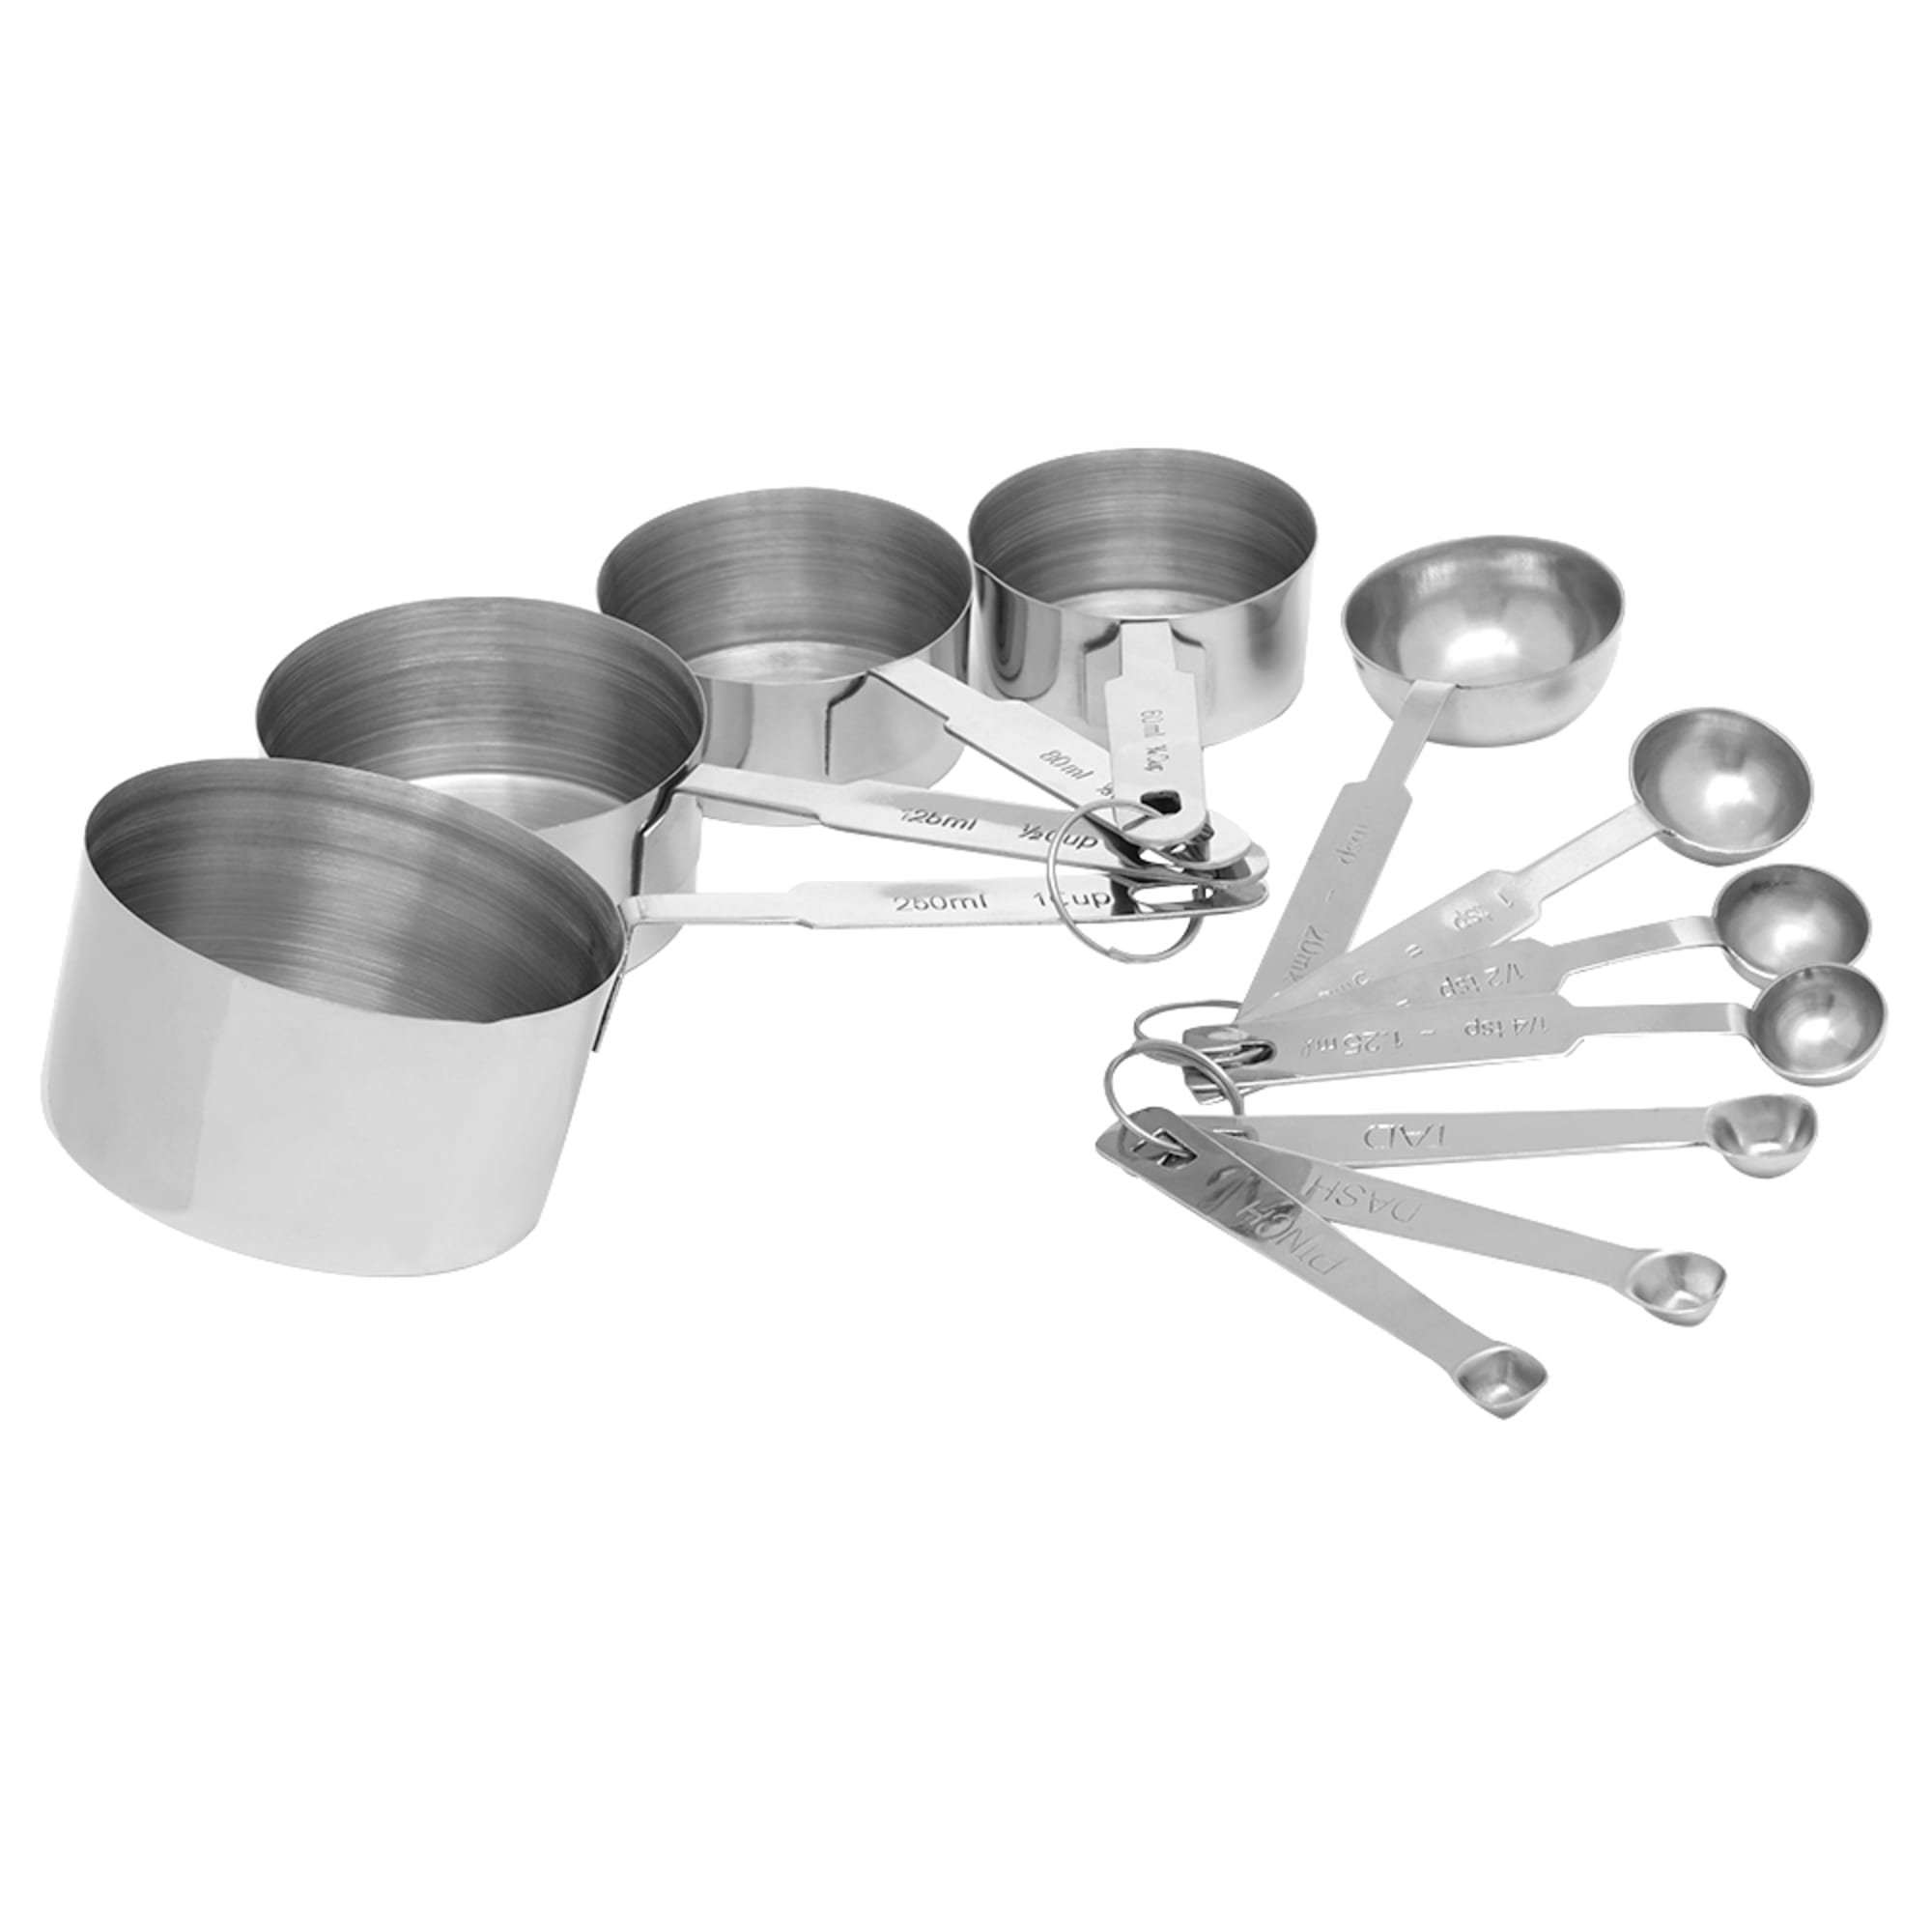 9 Piece Measuring Spoon: The Measuring Cylinder Set Includes1/16 Teaspoon,  1/8 Teaspoon, 1/4 Teaspoon, 1/3 Teaspoon, 1/2 Teaspoon, 3/4 Teaspoon, 1  Teaspoon, 1/2 Tea 